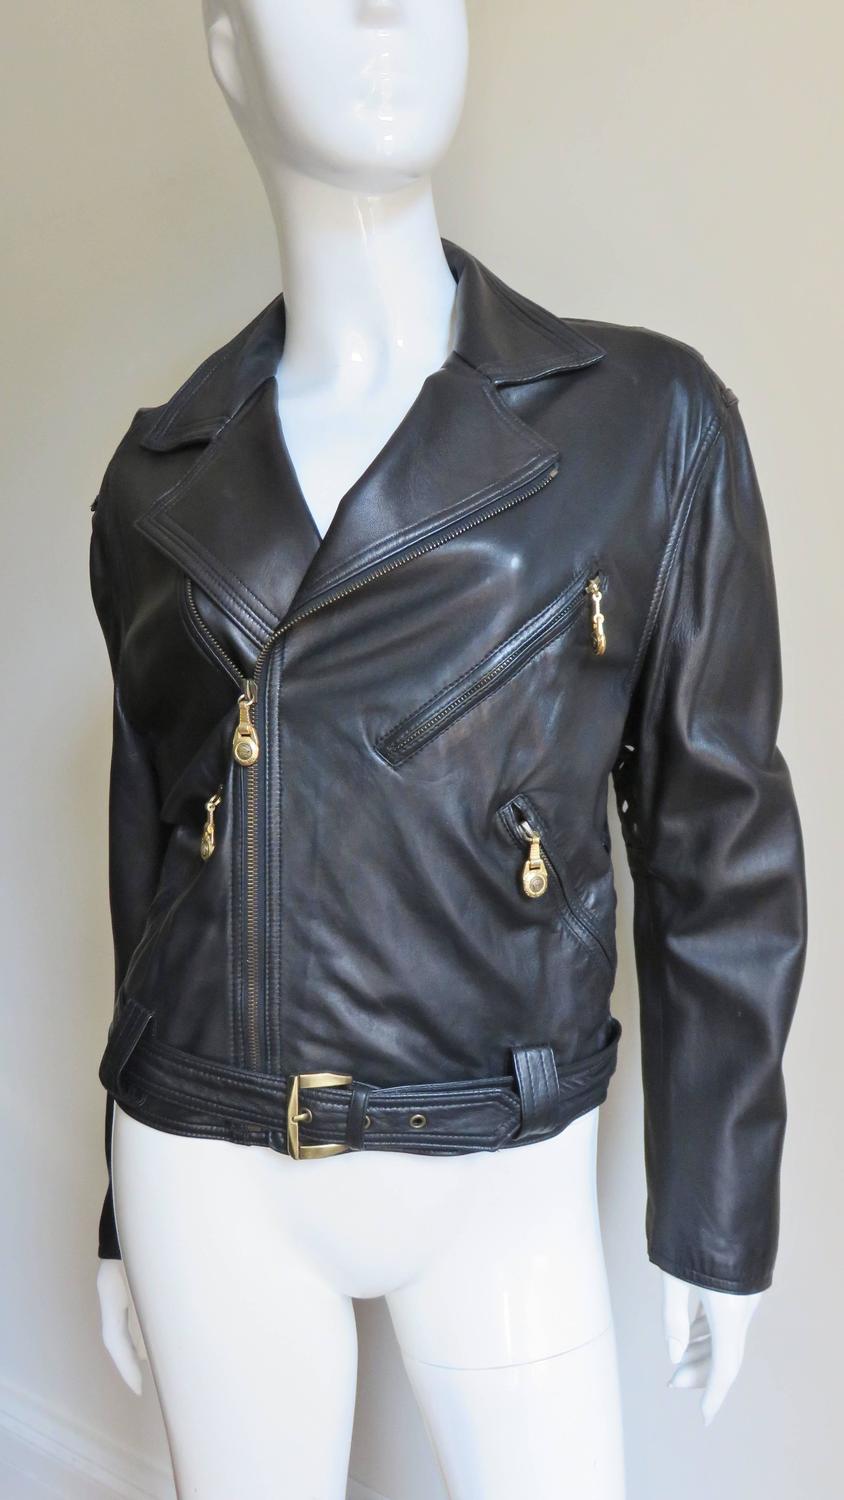 Vintage Gianni Versace Thatched Detail Leather Jacket For Sale at 1stdibs